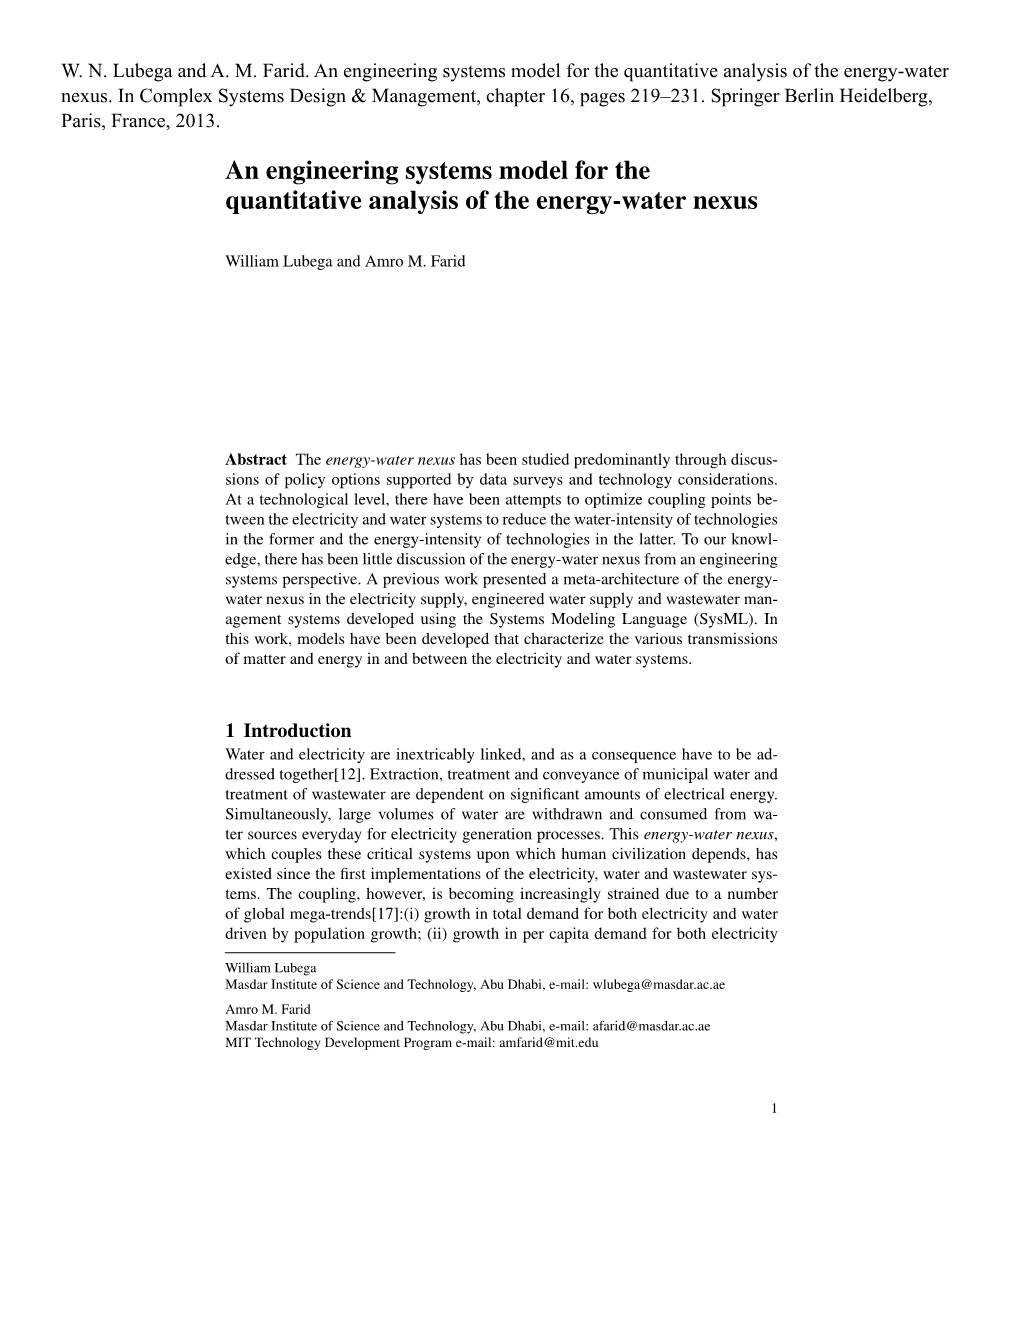 An Engineering Systems Model for the Quantitative Analysis of the Energy-Water Nexus